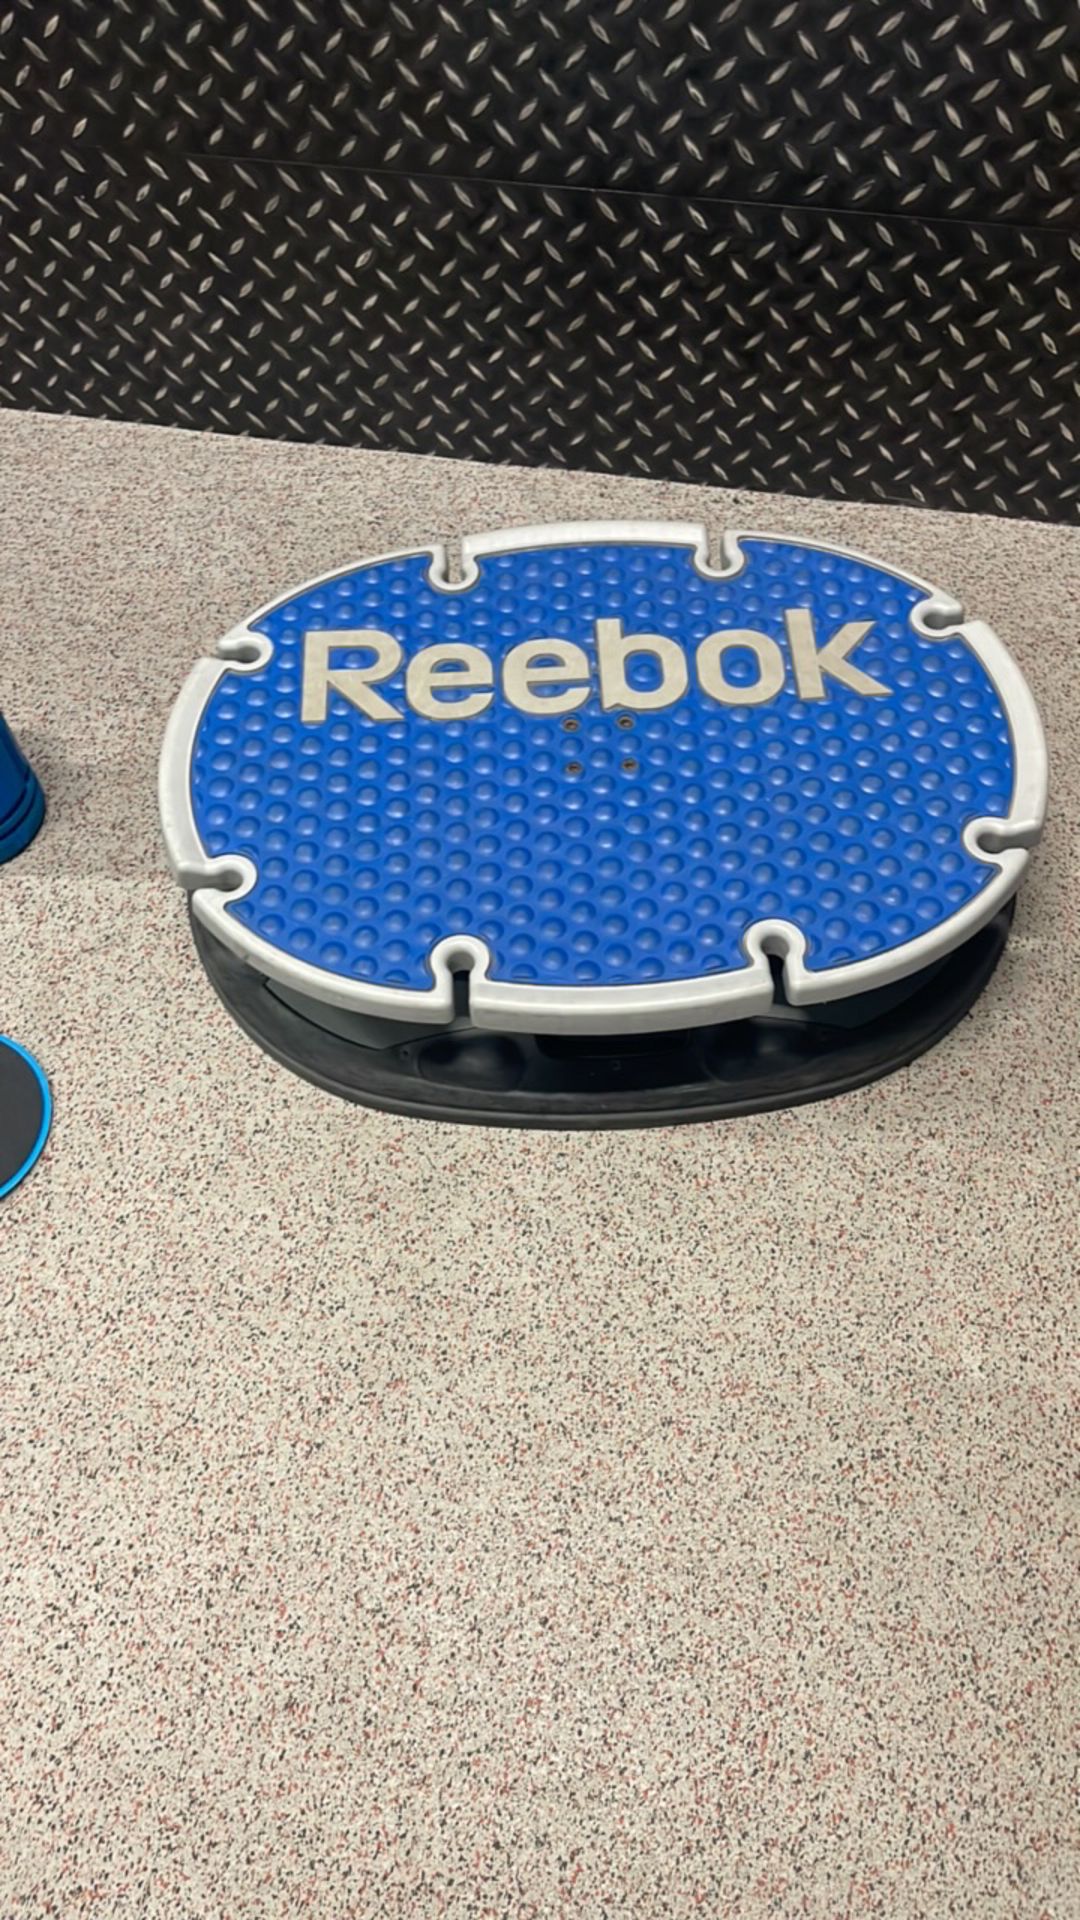 Gym Mat & Stands, Reebok Balance Board and rollers - Image 2 of 8